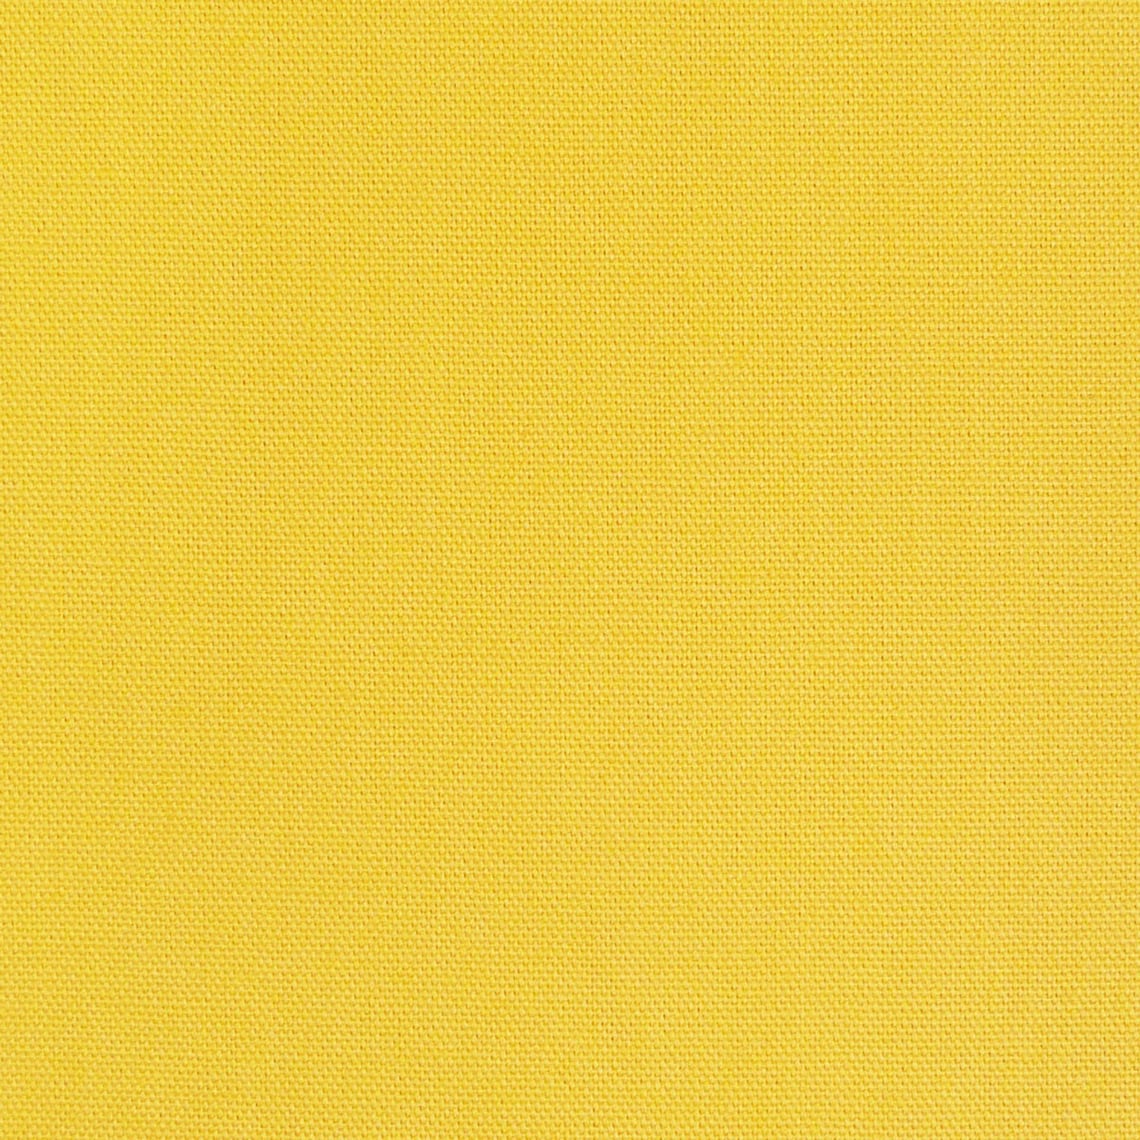 Creative fabric cotton fabric canvas solid color yellow 1.4 m | Etsy